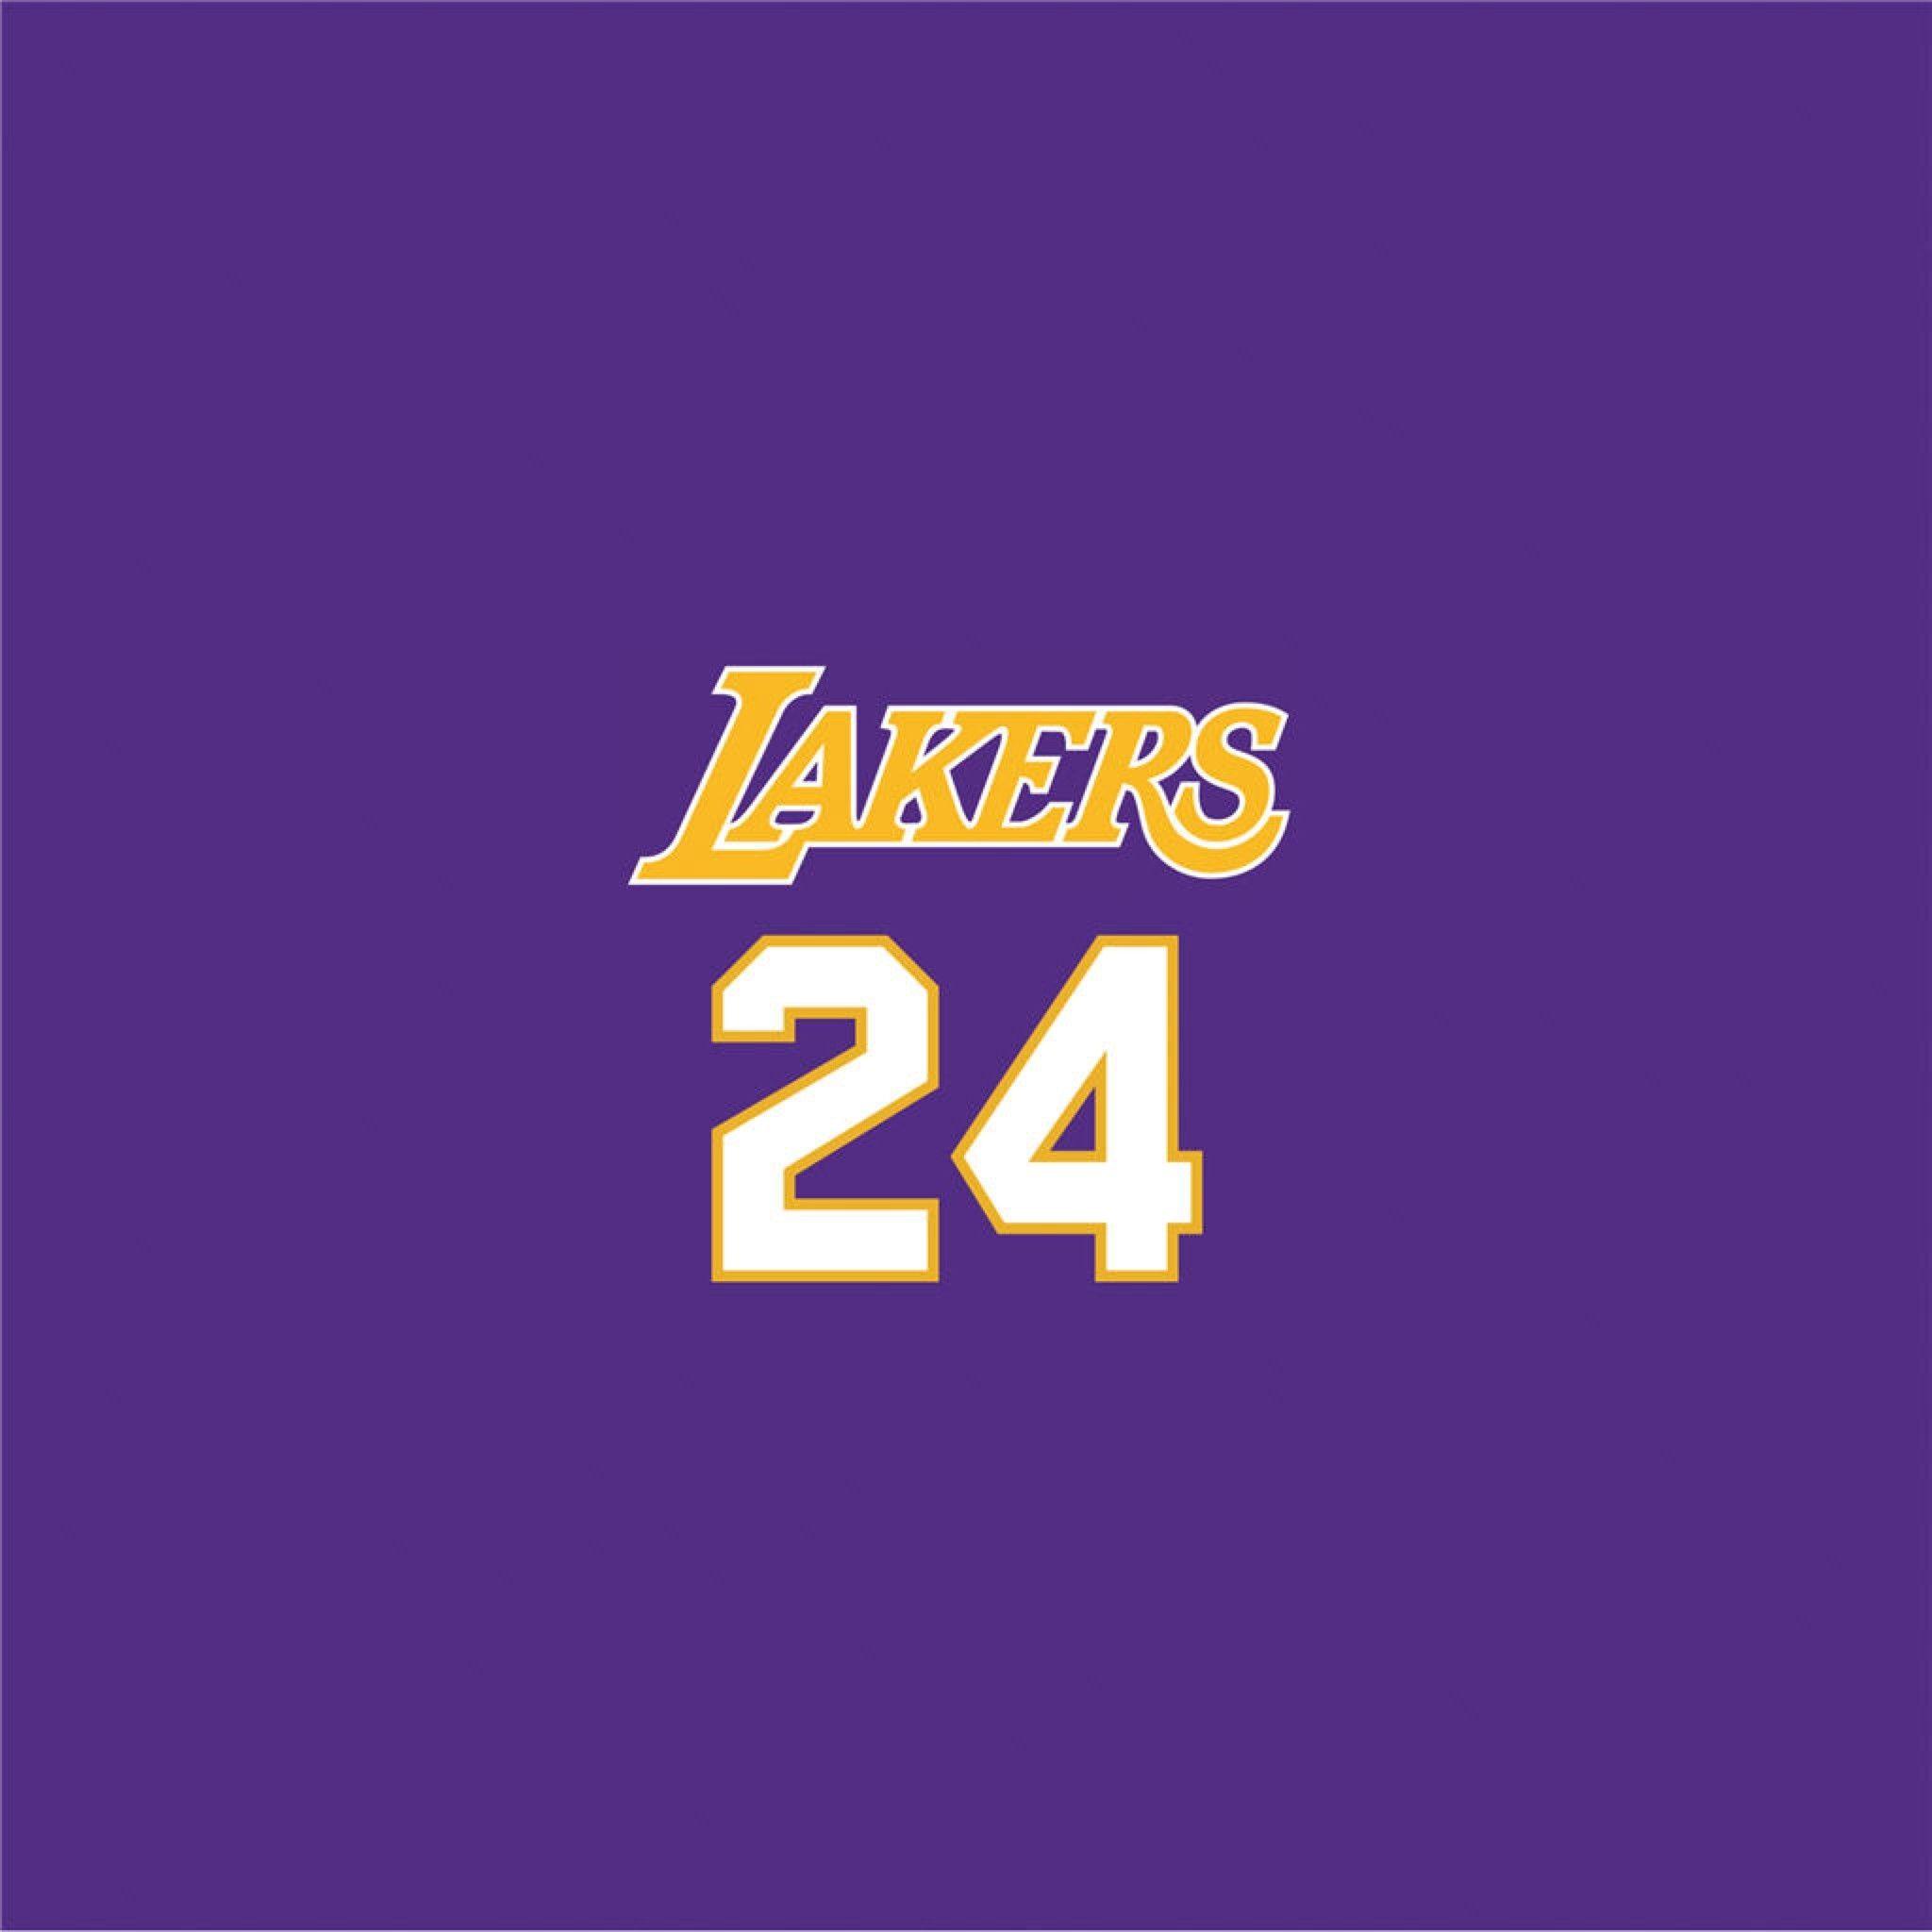 Lakers 24 Wallpapers Top Free Lakers 24 Backgrounds Wallpaperaccess